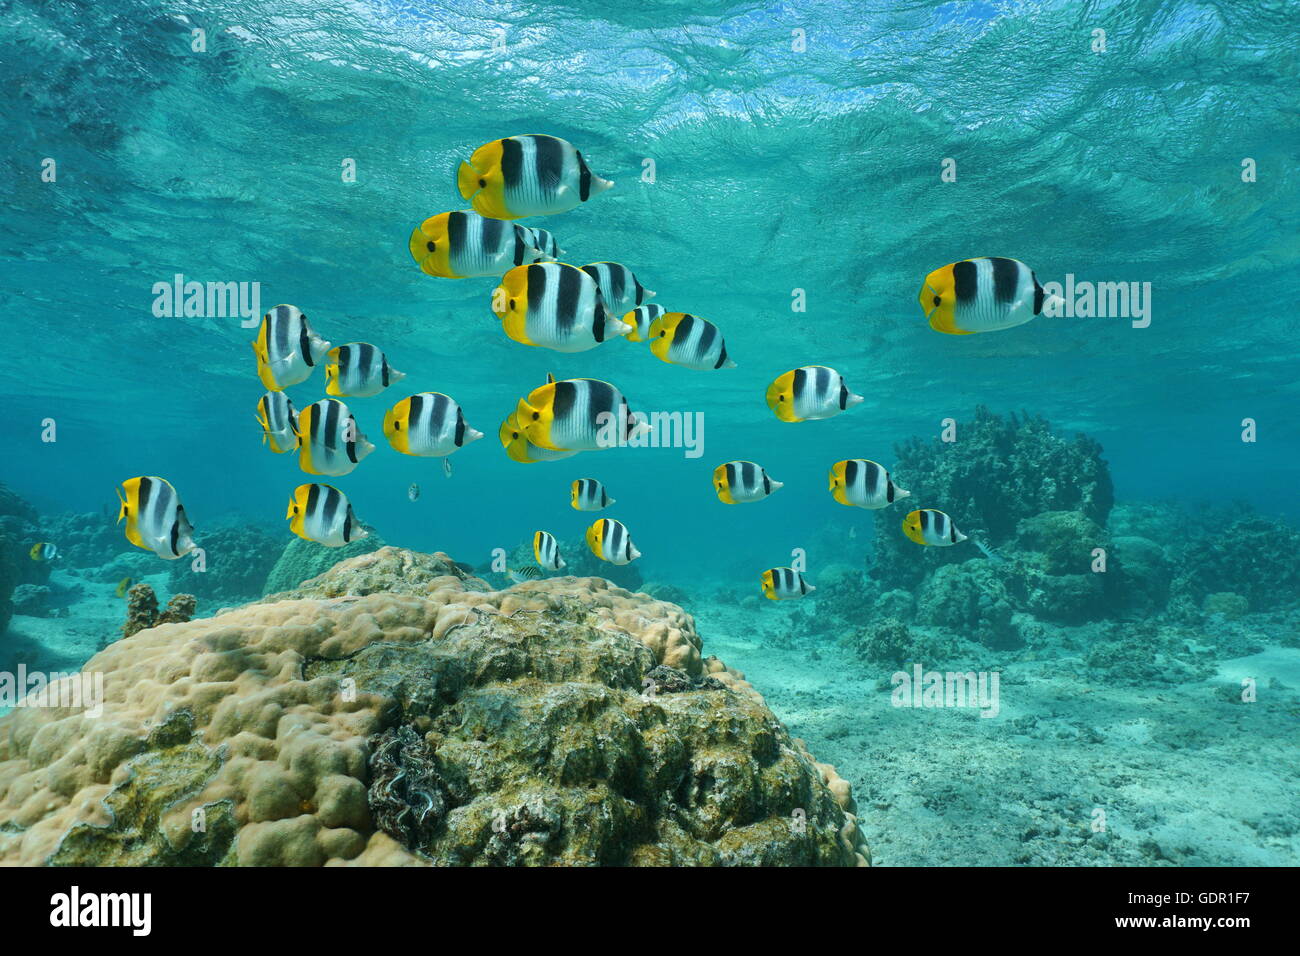 School of tropical fish Pacific double-saddle butterflyfish, Chaetodon ulietensis, underwater in the lagoon, Pacific ocean Stock Photo